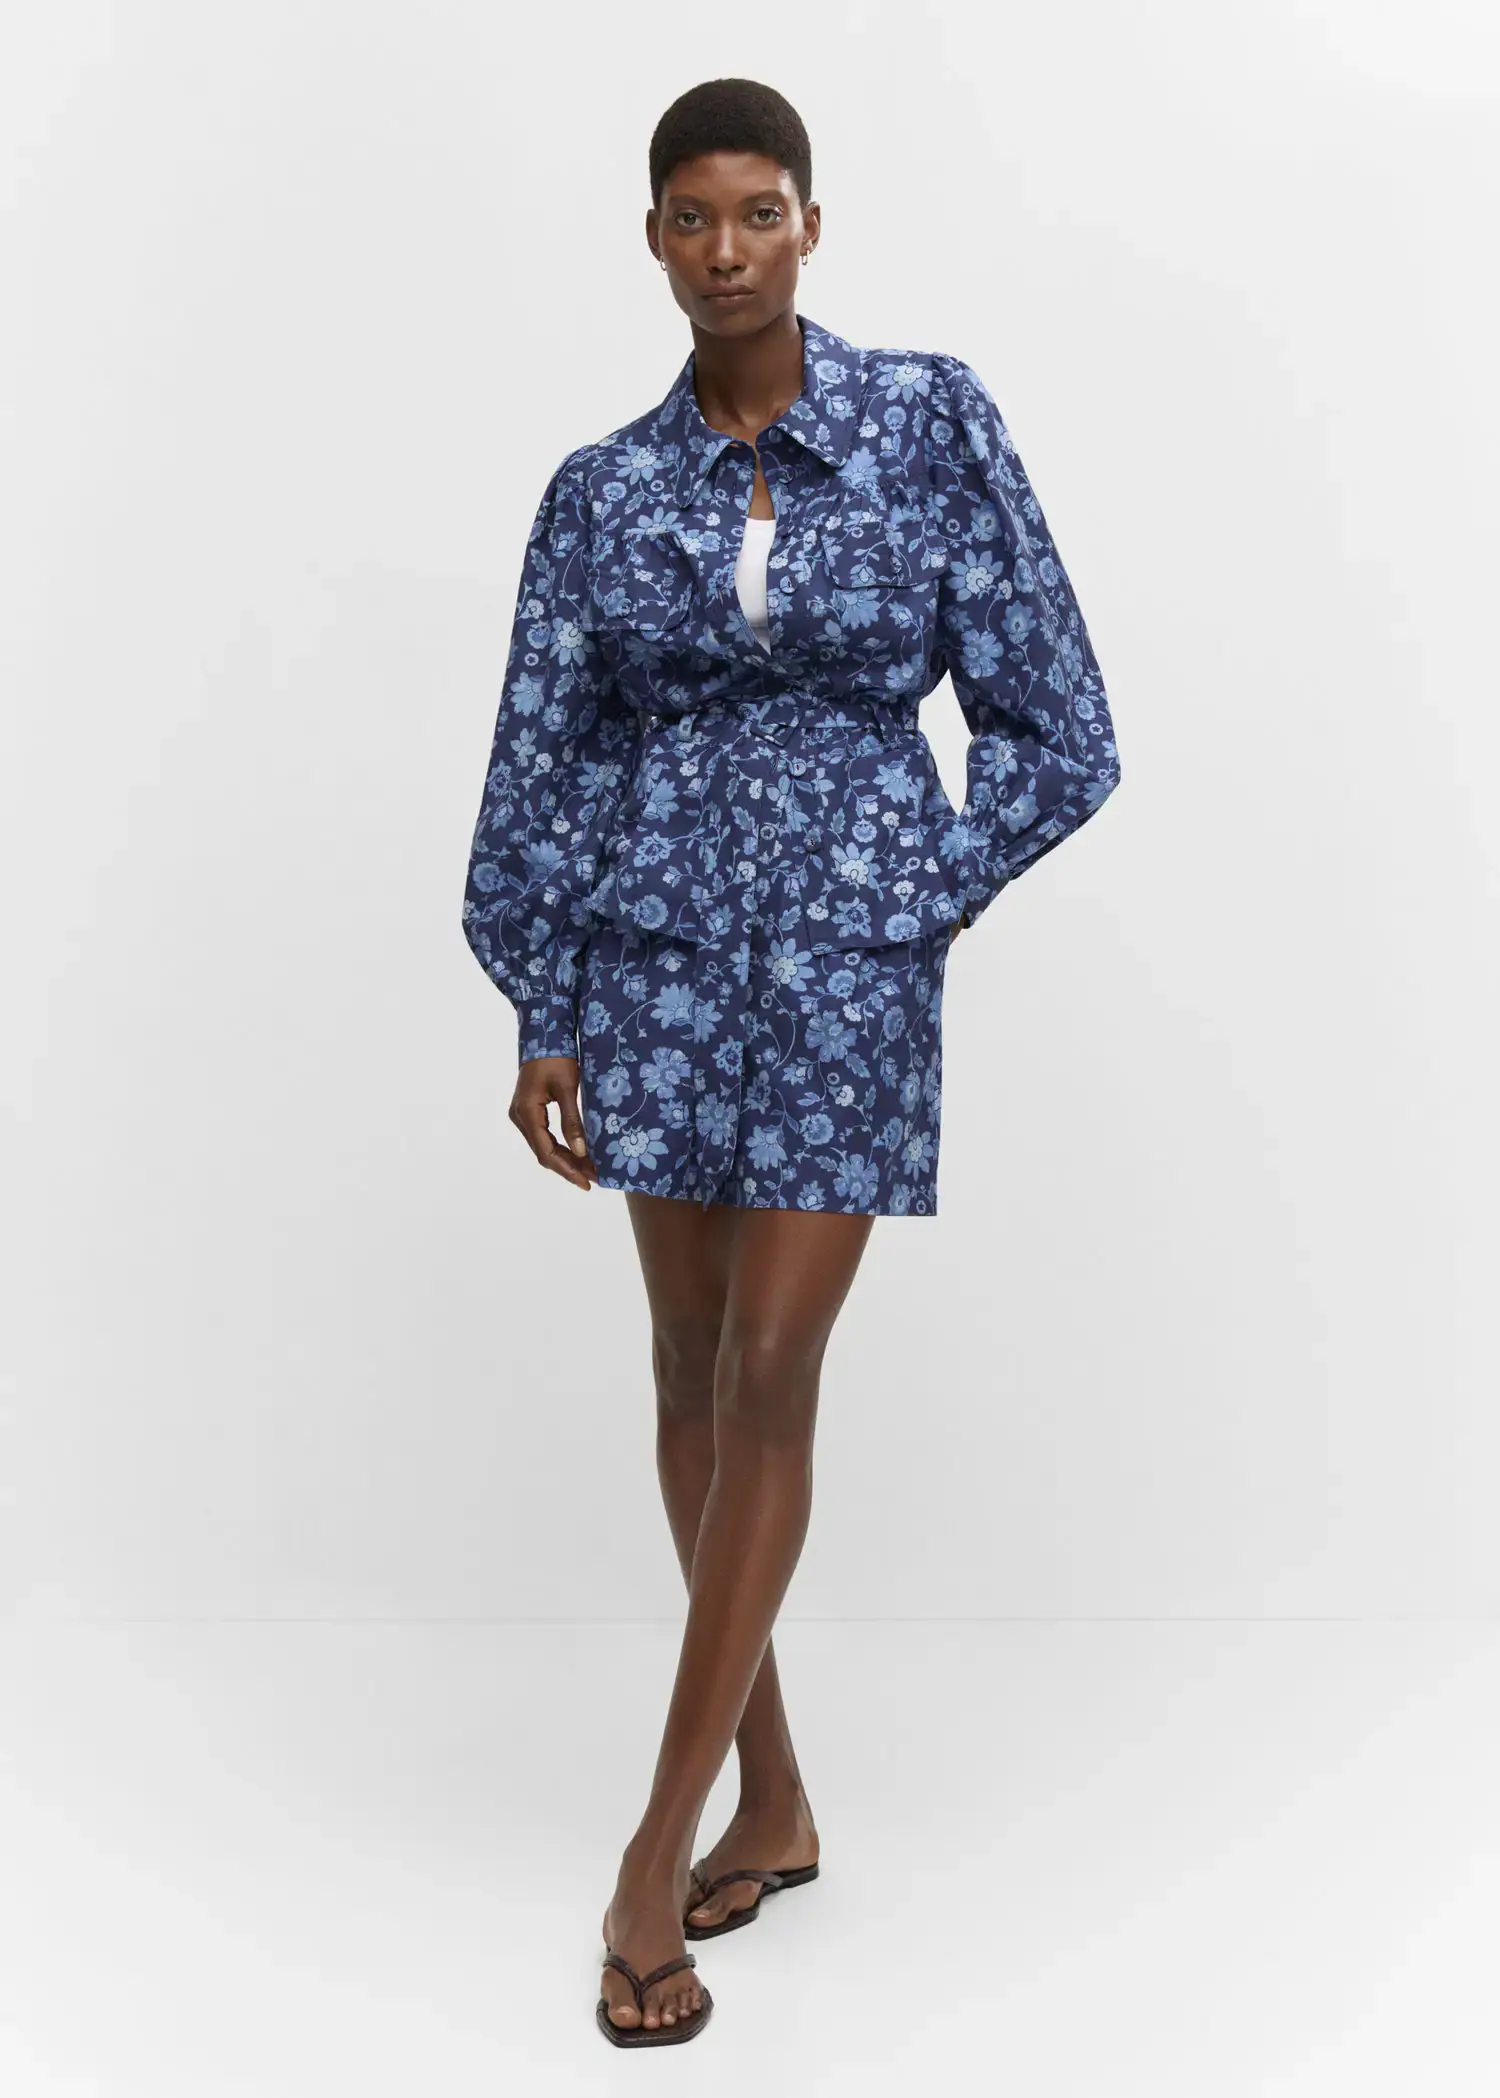 Mango Floral overshirt with belt. a woman in a blue floral dress standing in a room. 